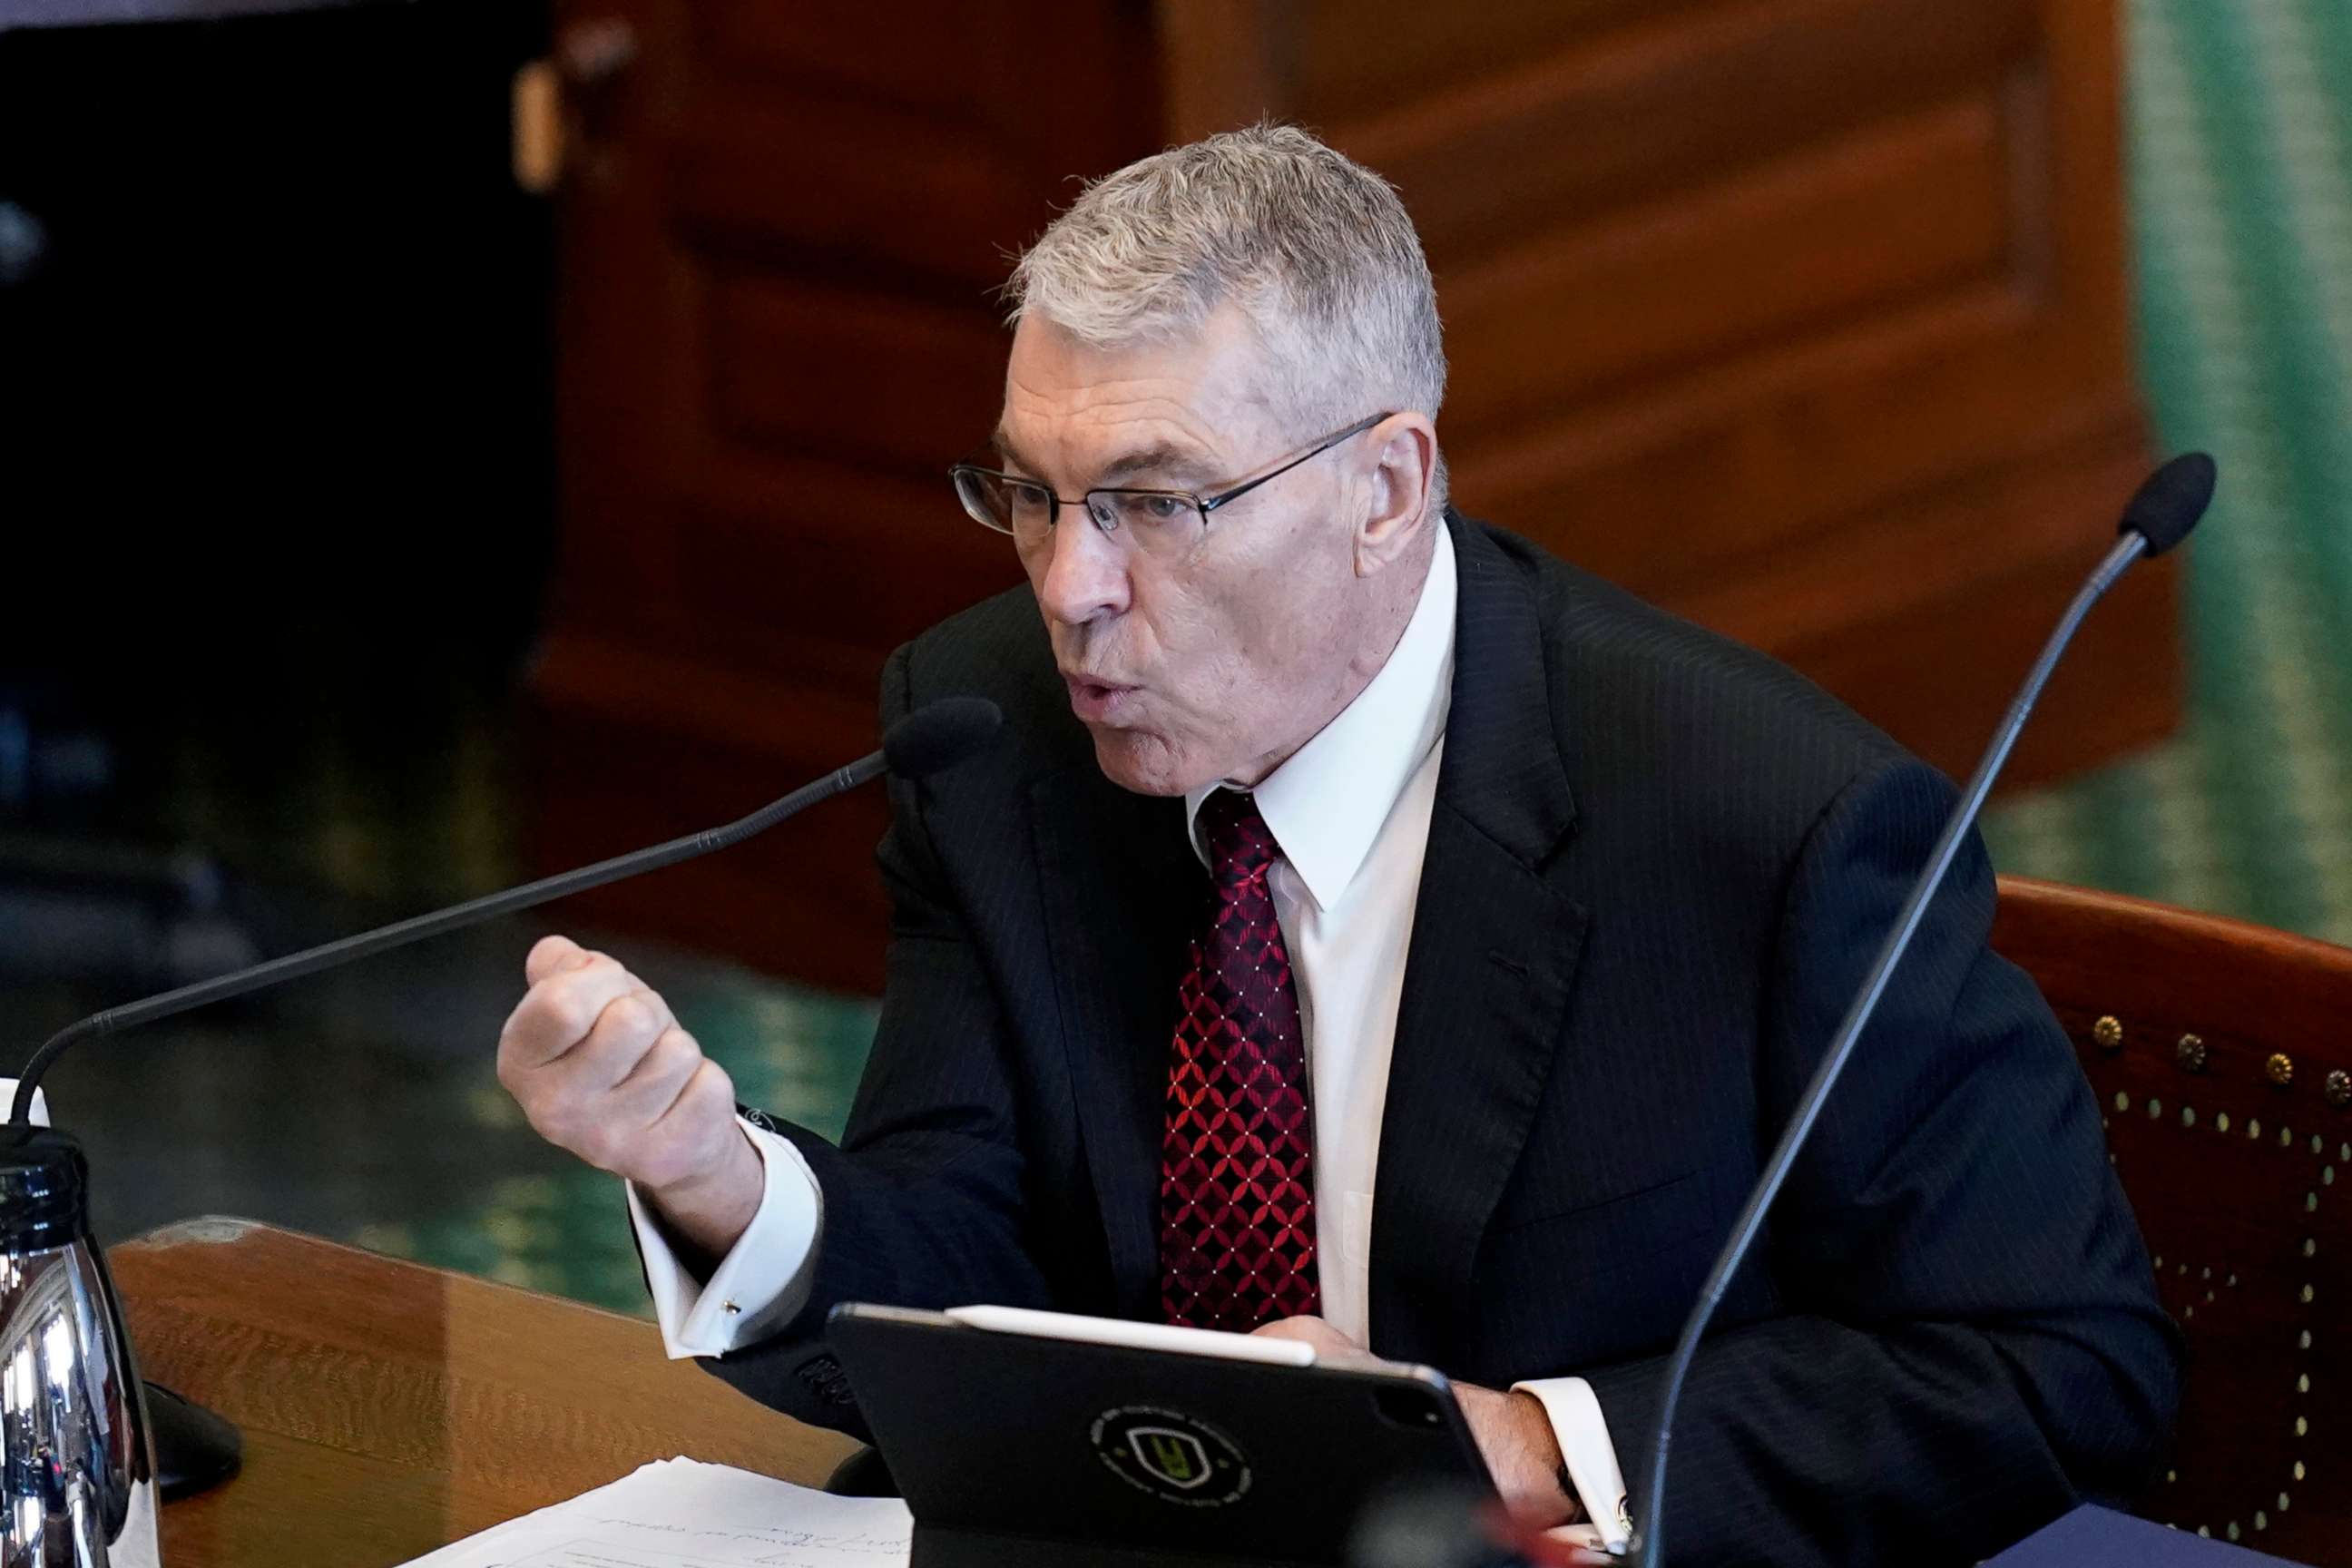 PHOTO: Texas Department of Public Safety Director Steve McCraw testifies at a Texas Senate hearing at the state capitol, June 21, 2022, in Austin, Texas.